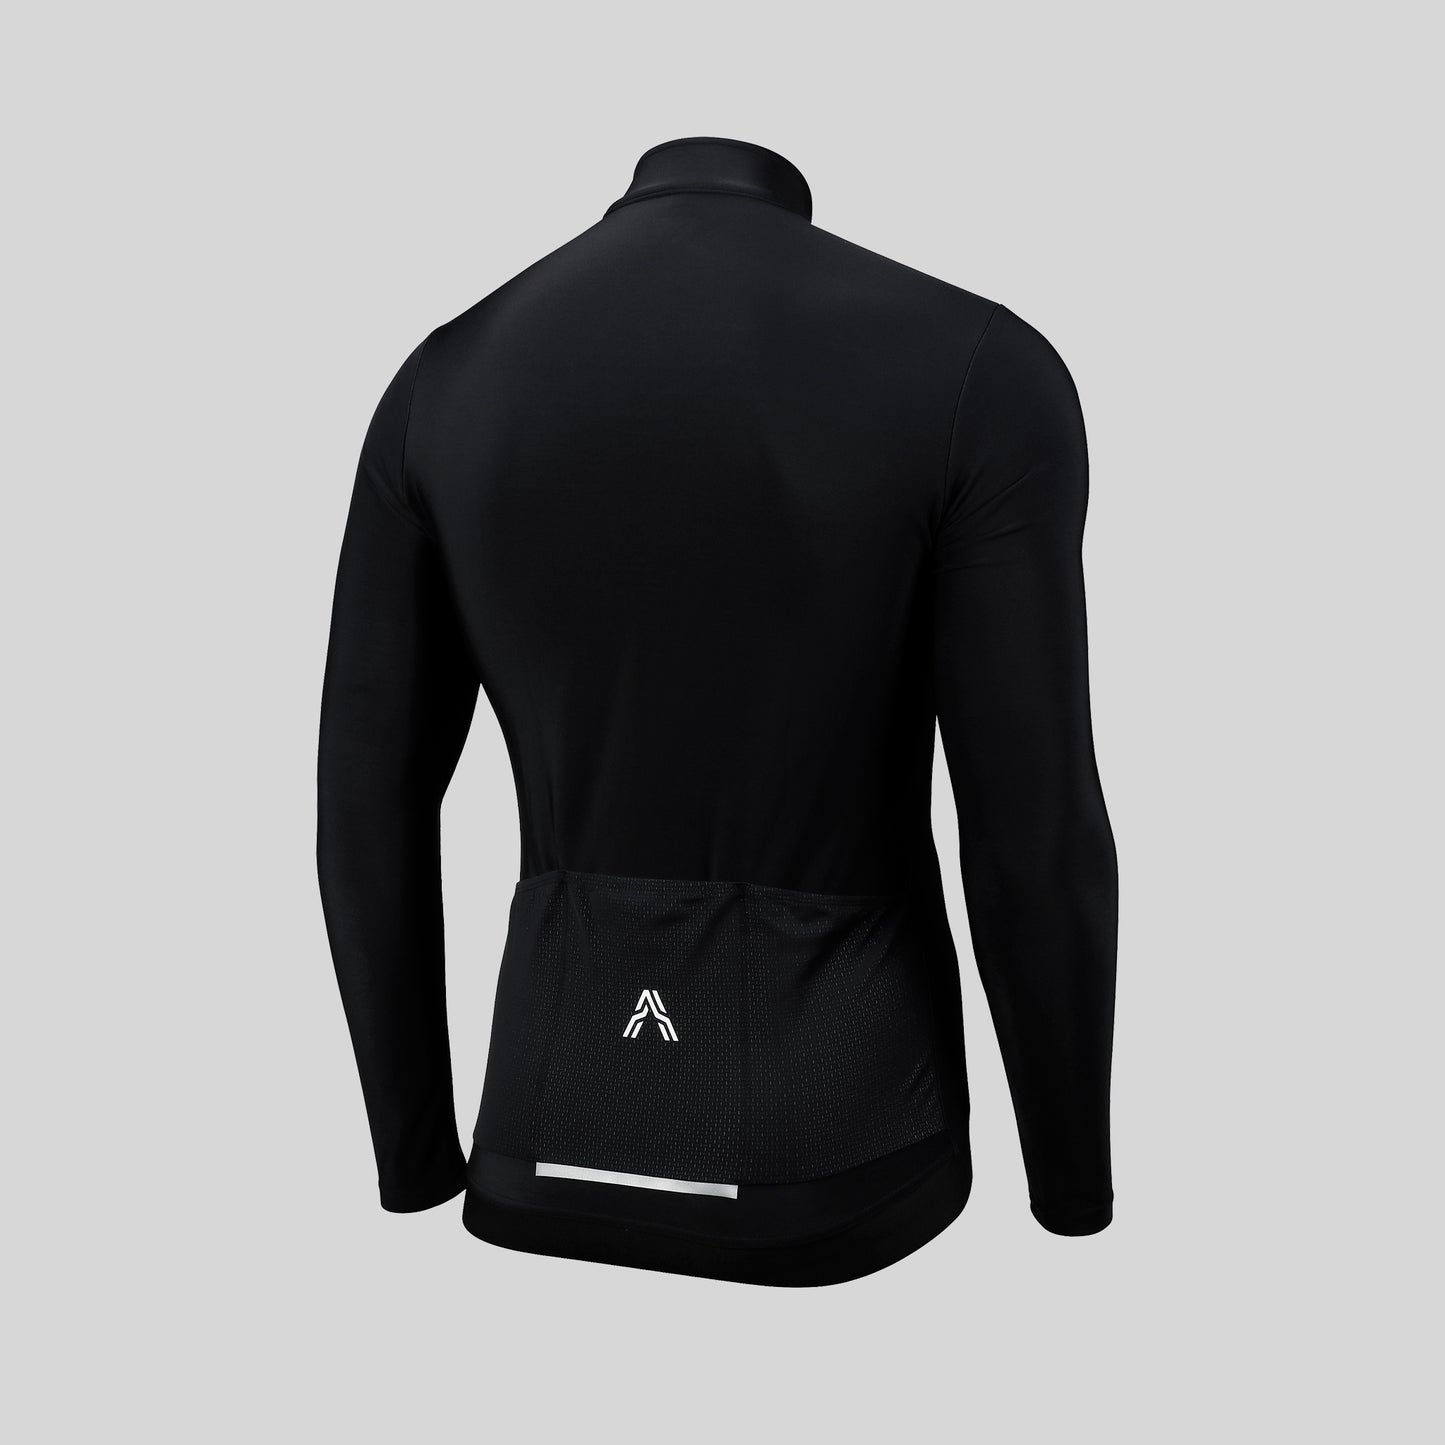 Milano Thermal Long Sleeve Jersey Black from Ascender Cycling Club Zürich Switzerland Backside View